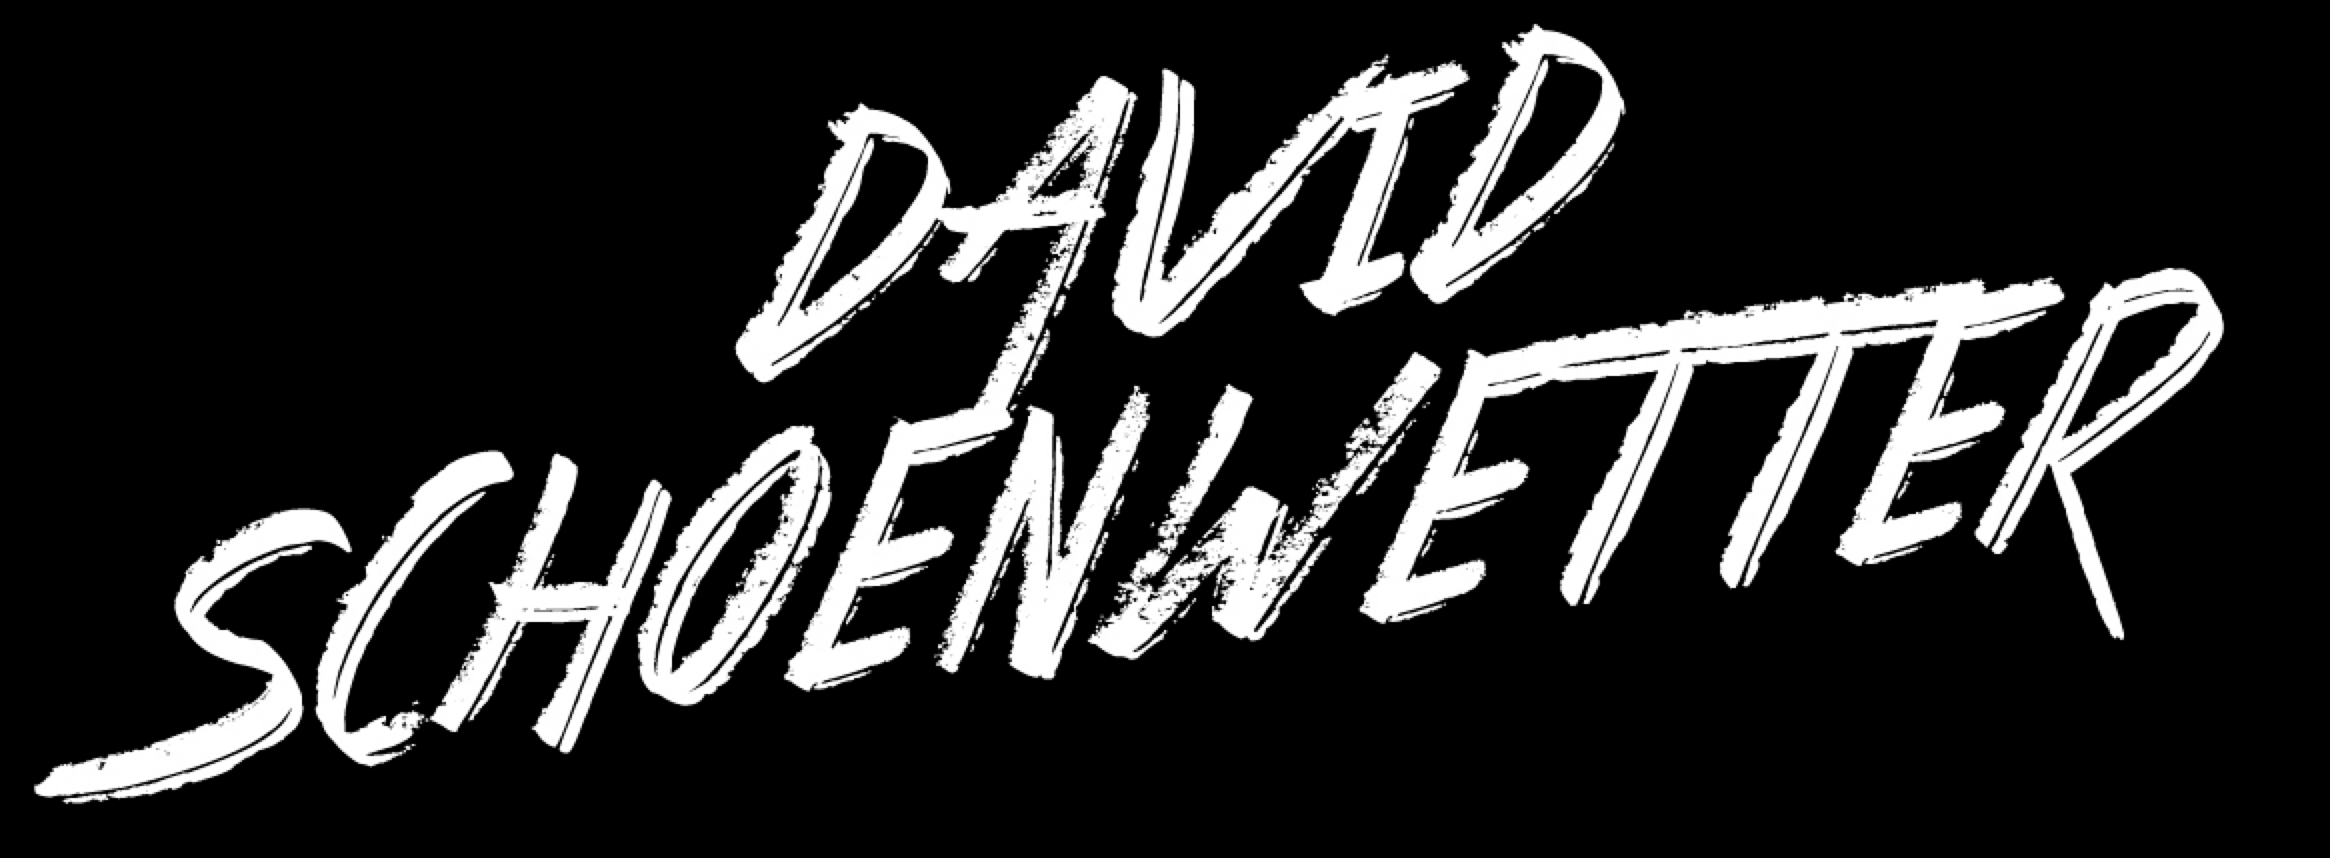 David Schoenwetter - NYC based Music Producer, Mixer &amp; Songwriter